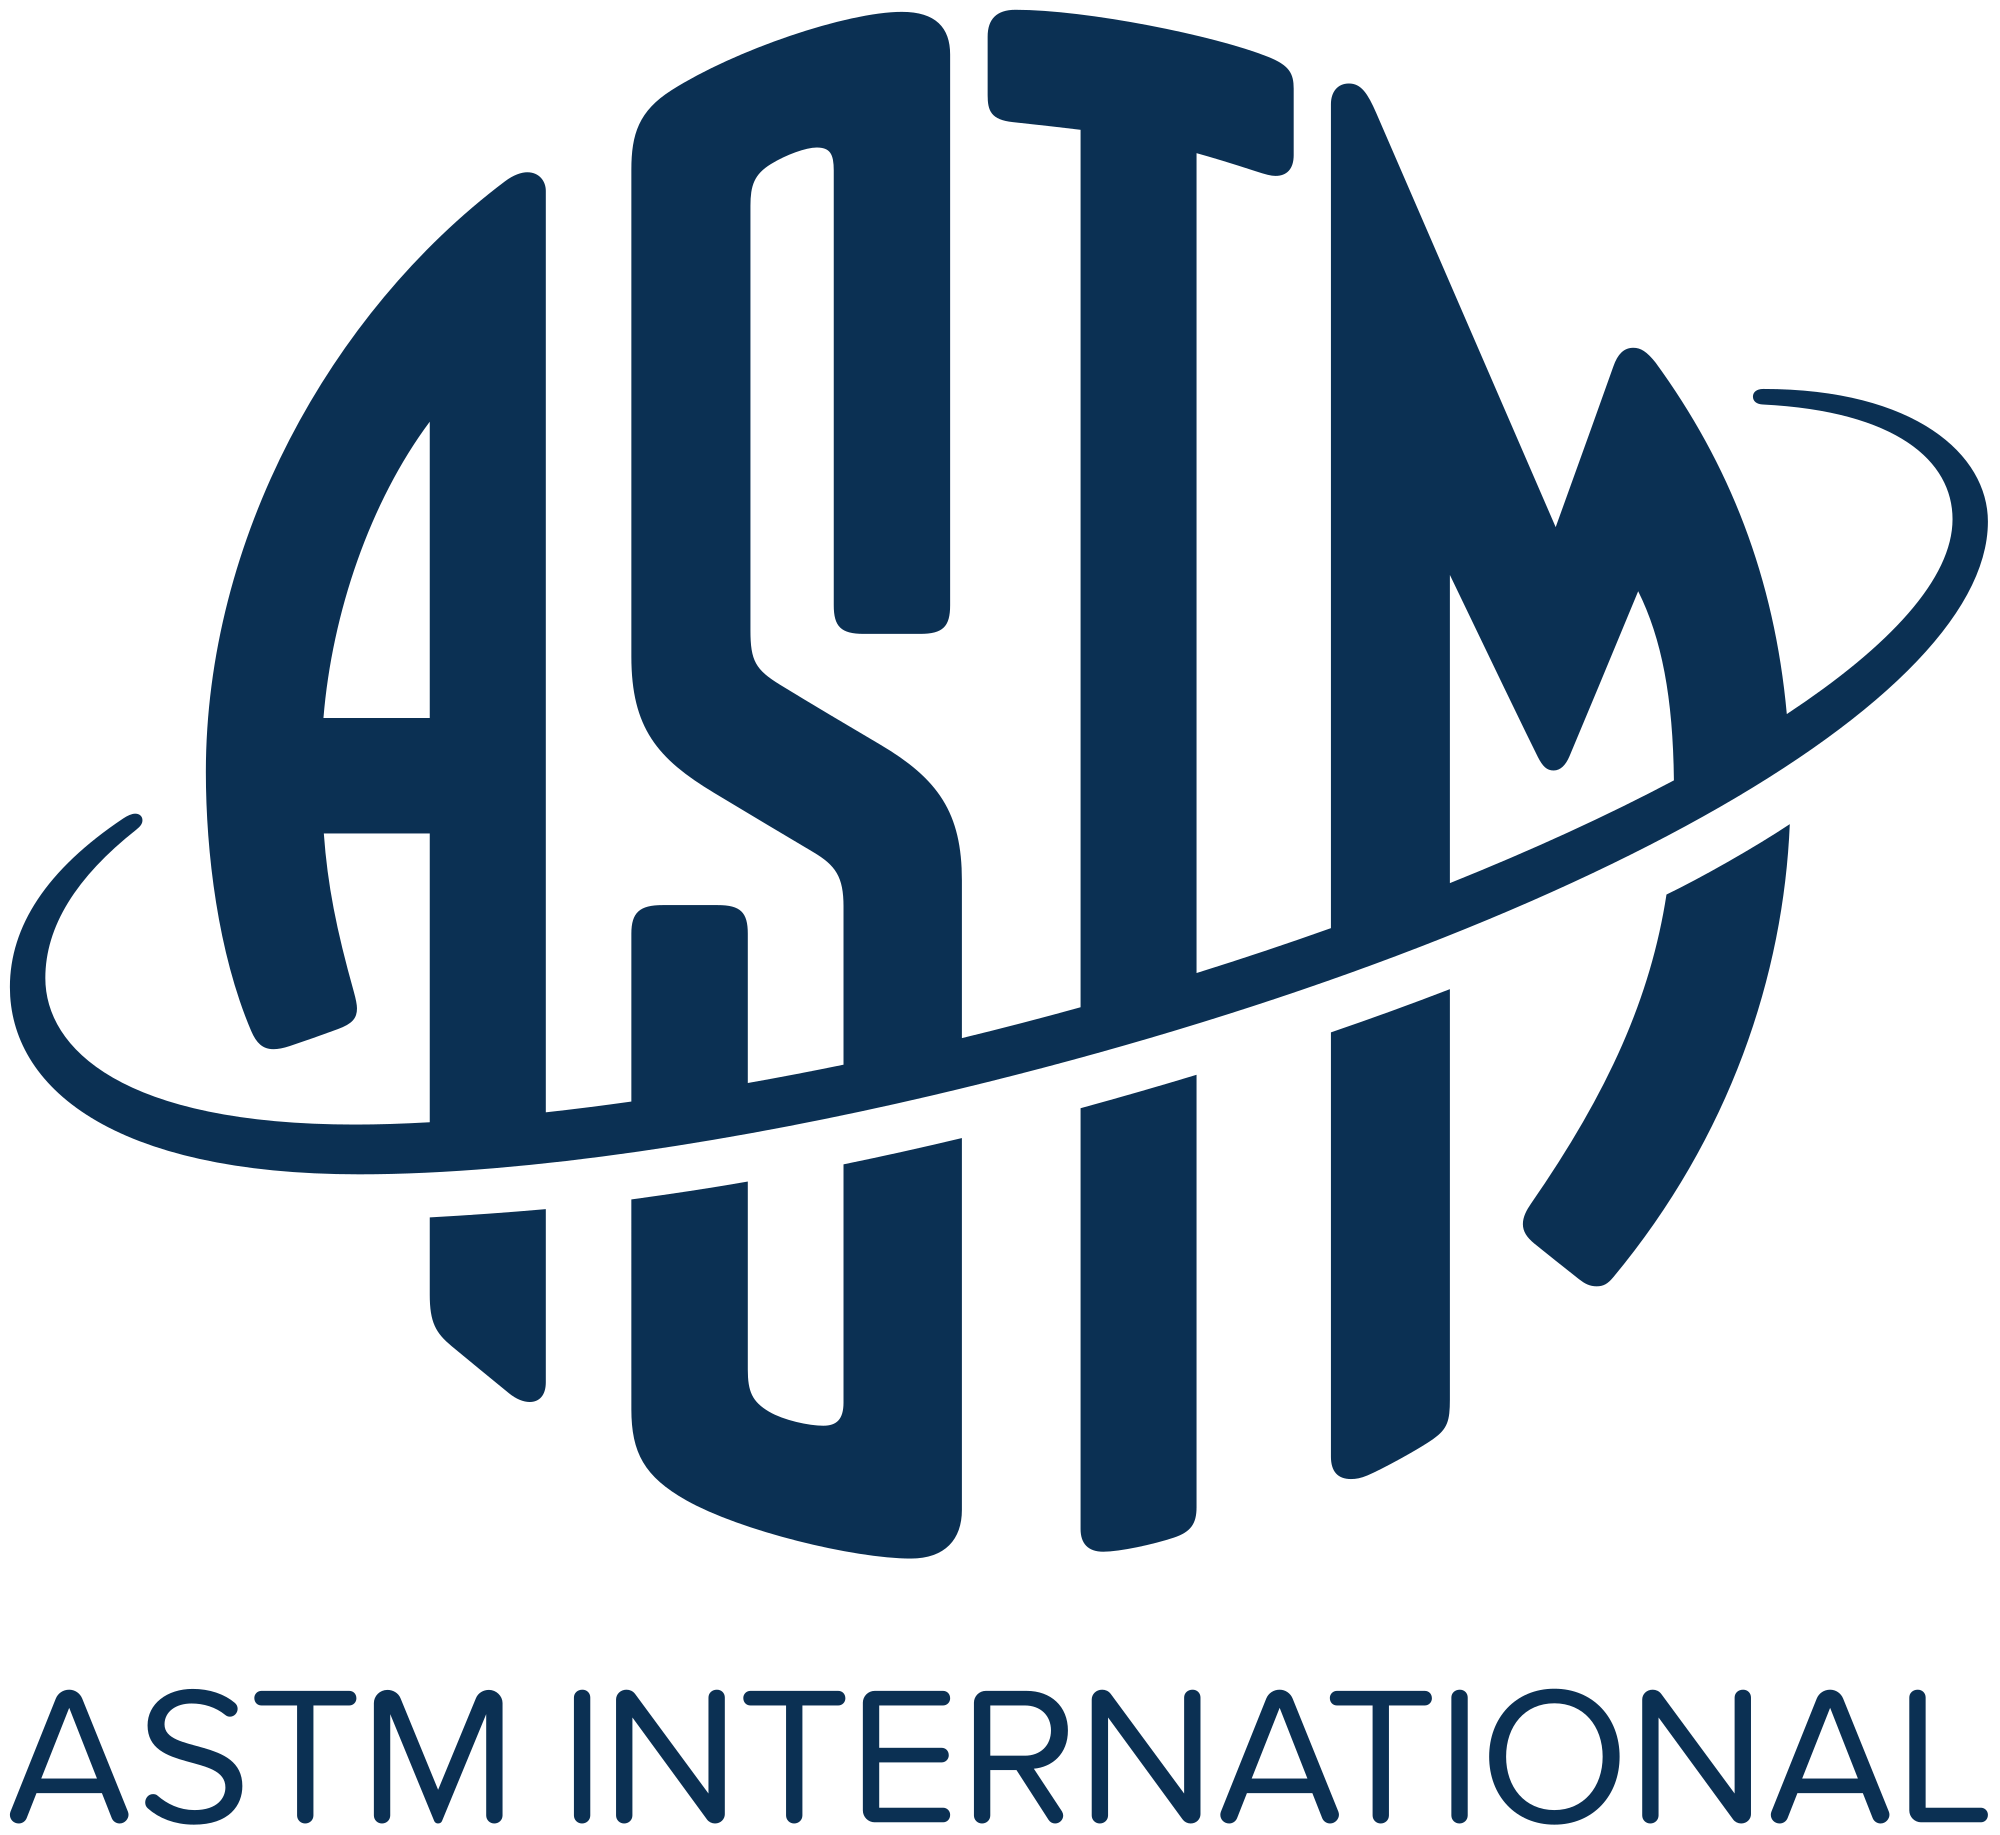 ASHI and Medic First Aid + ASTM International